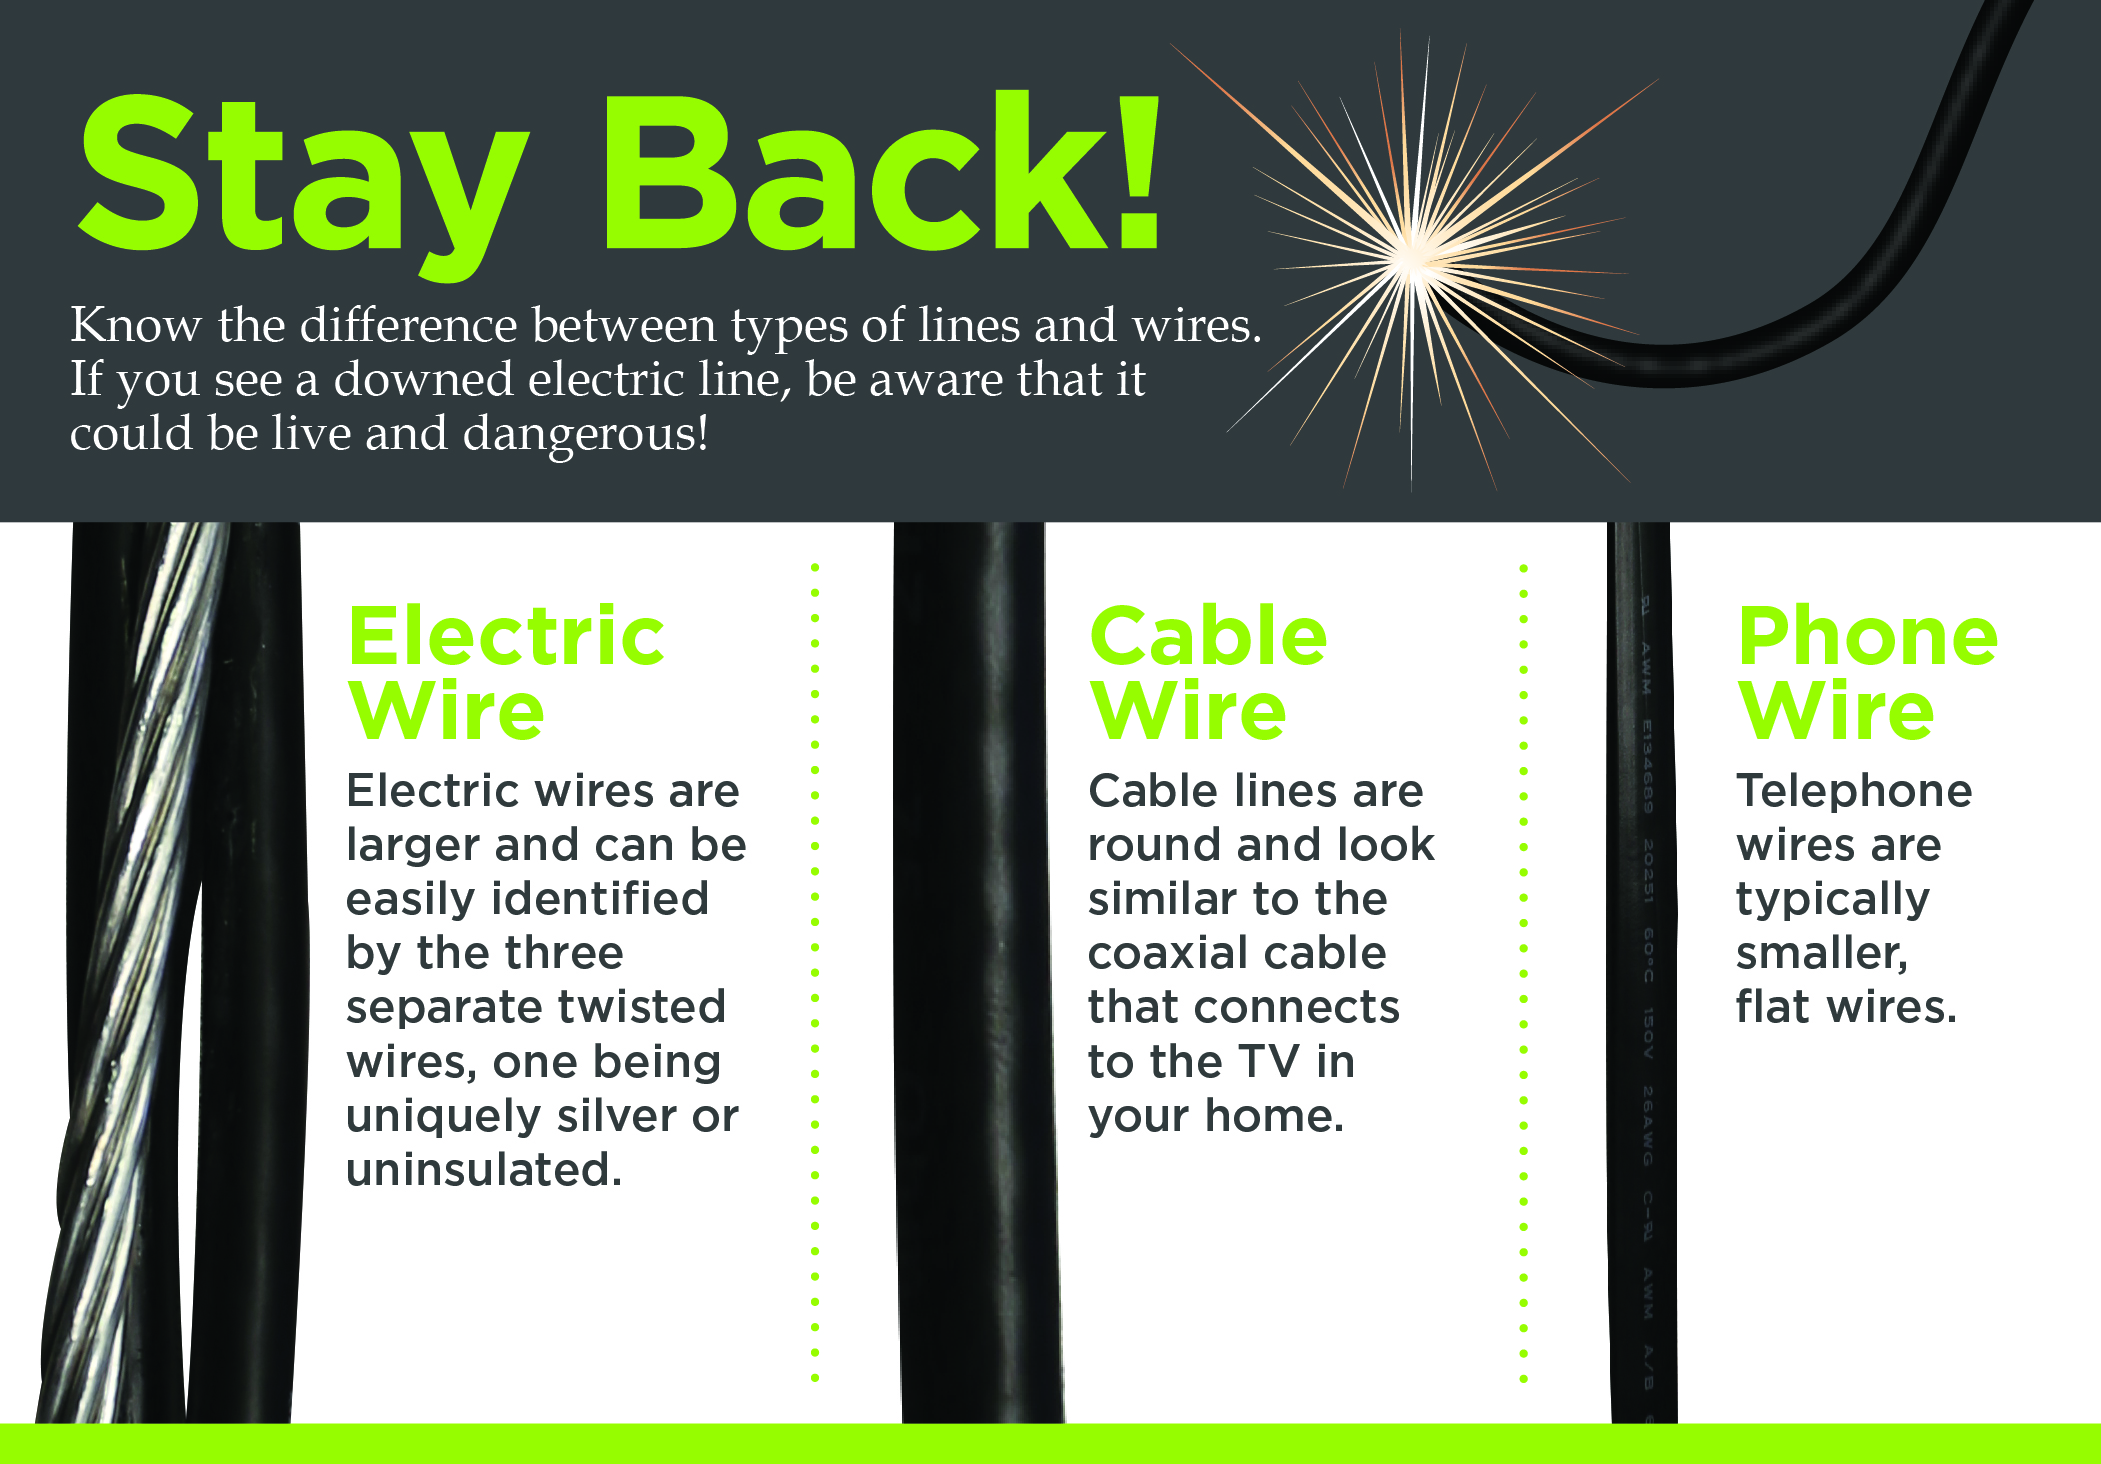 Know the difference between wires